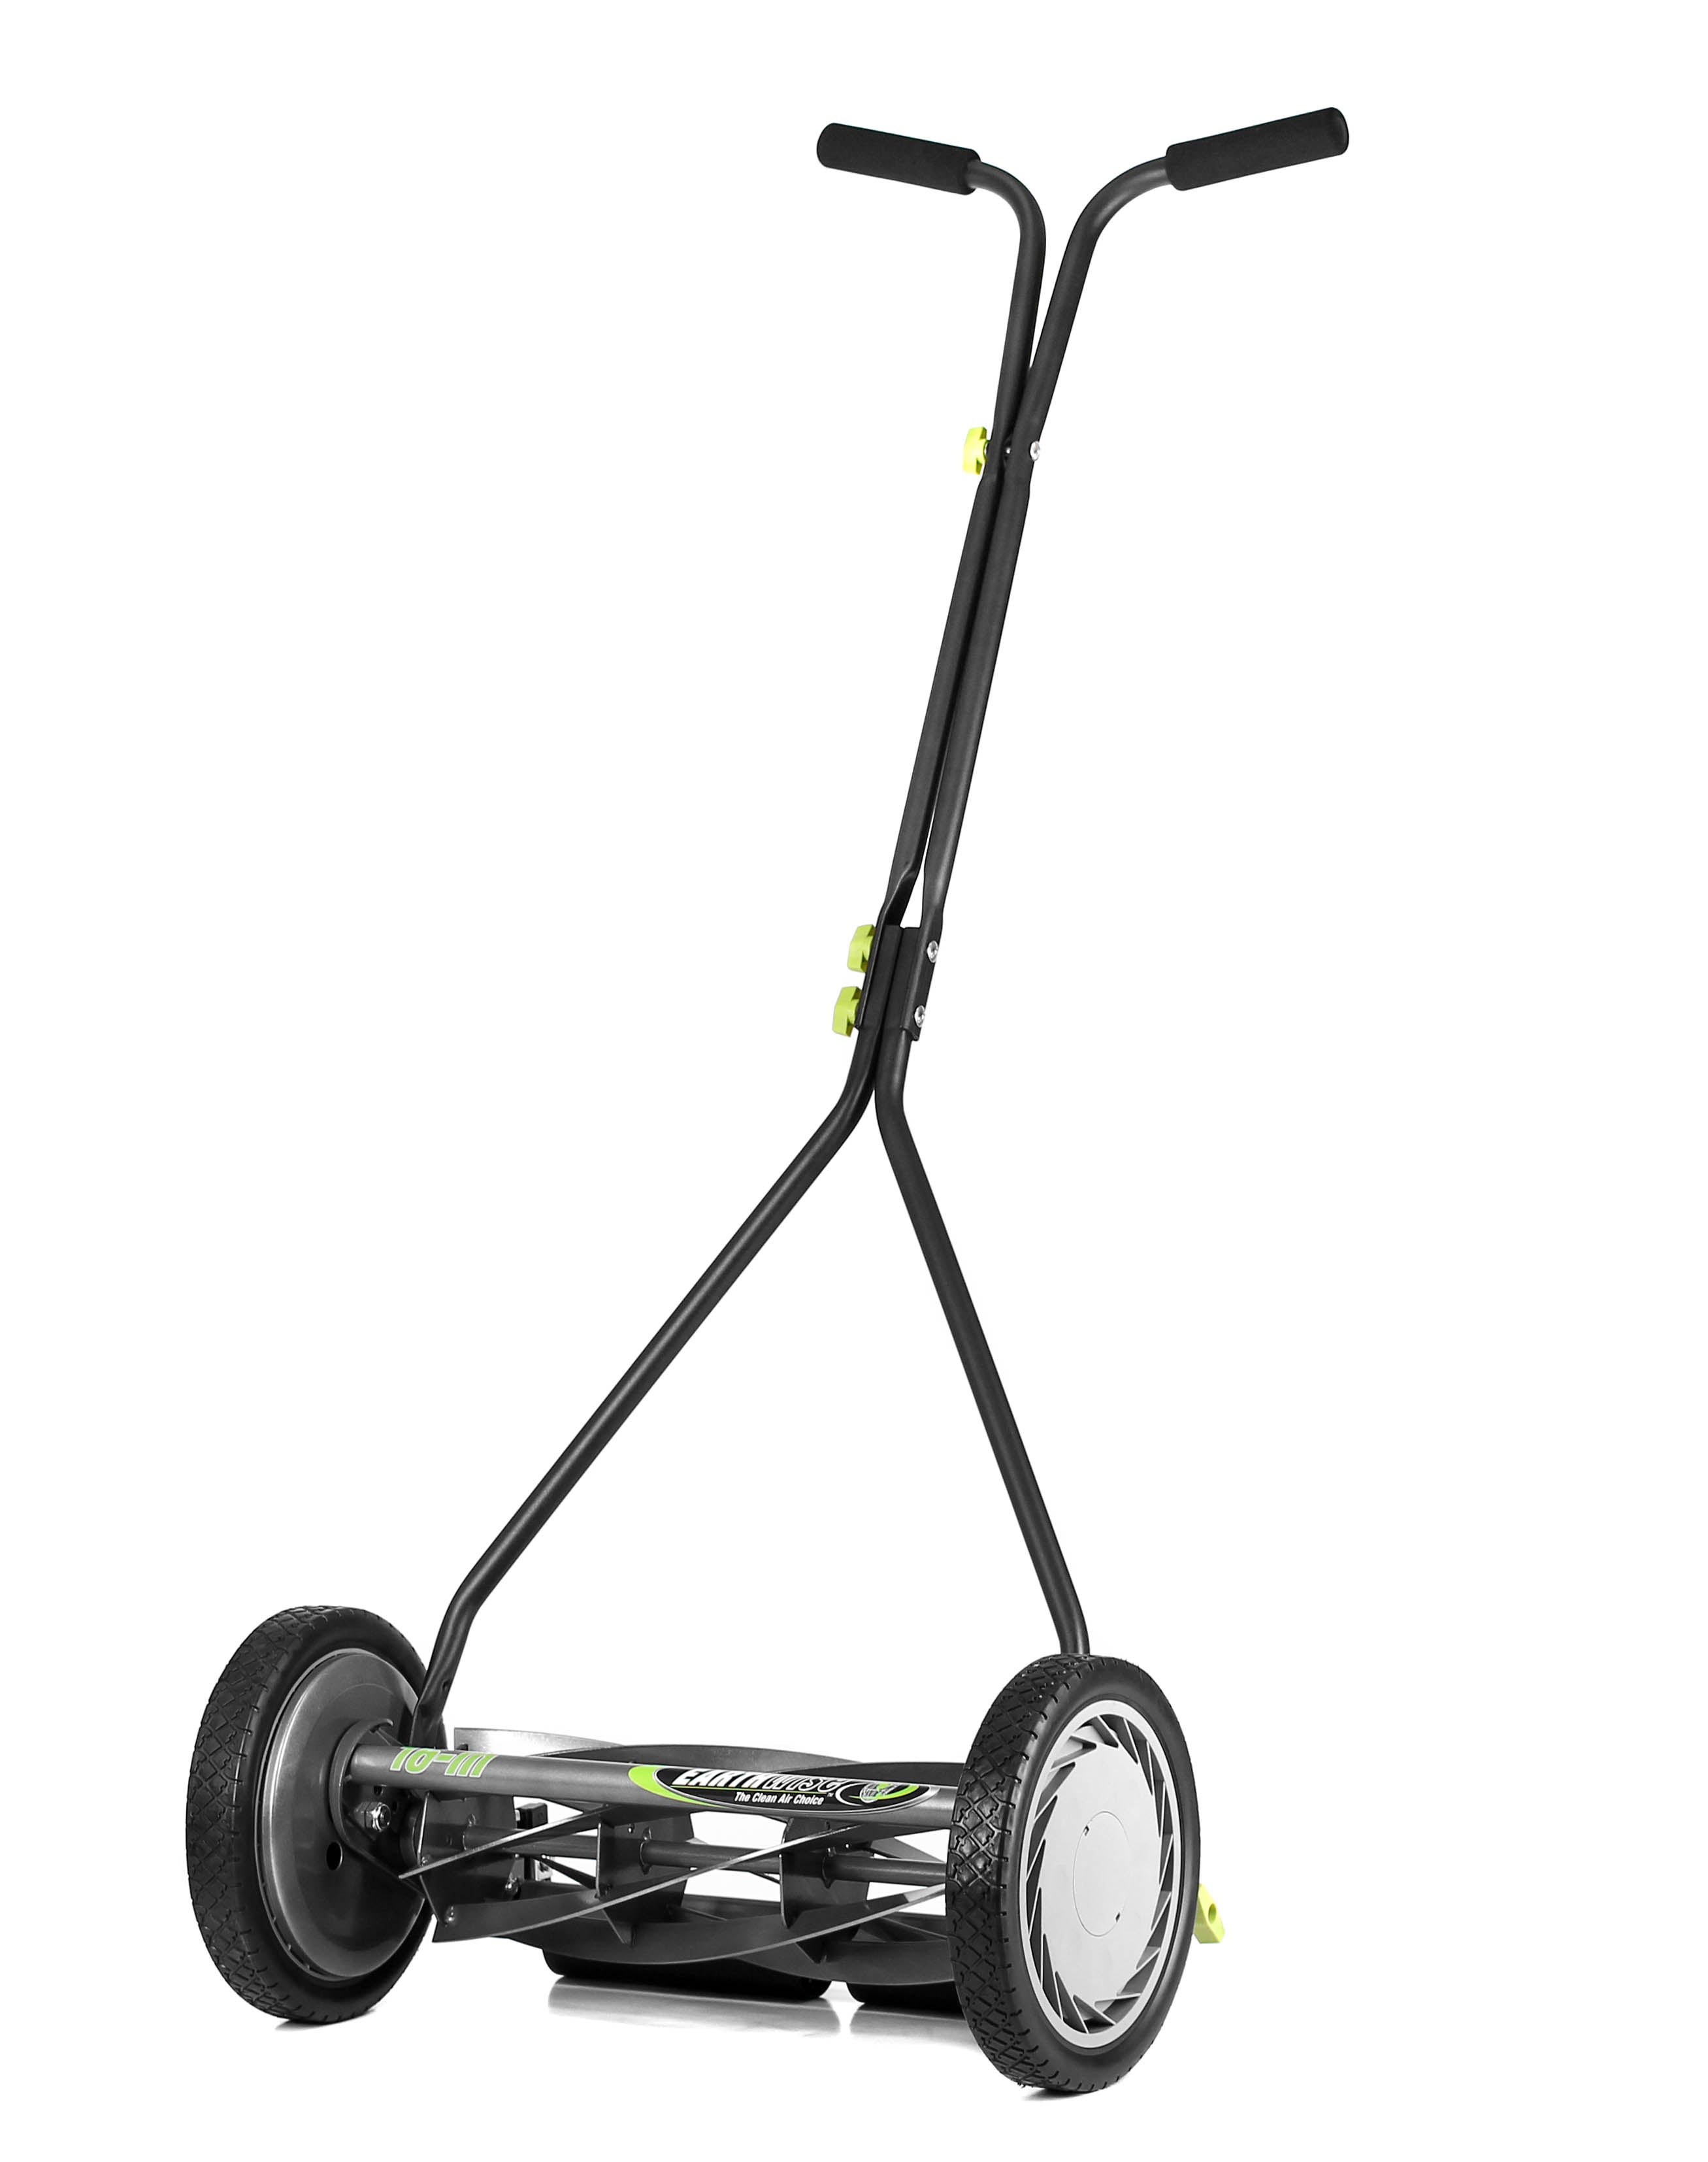 Earthwise Power Tools by ALM 16" Manual 7 Blade Reel Mower for Bent Grass